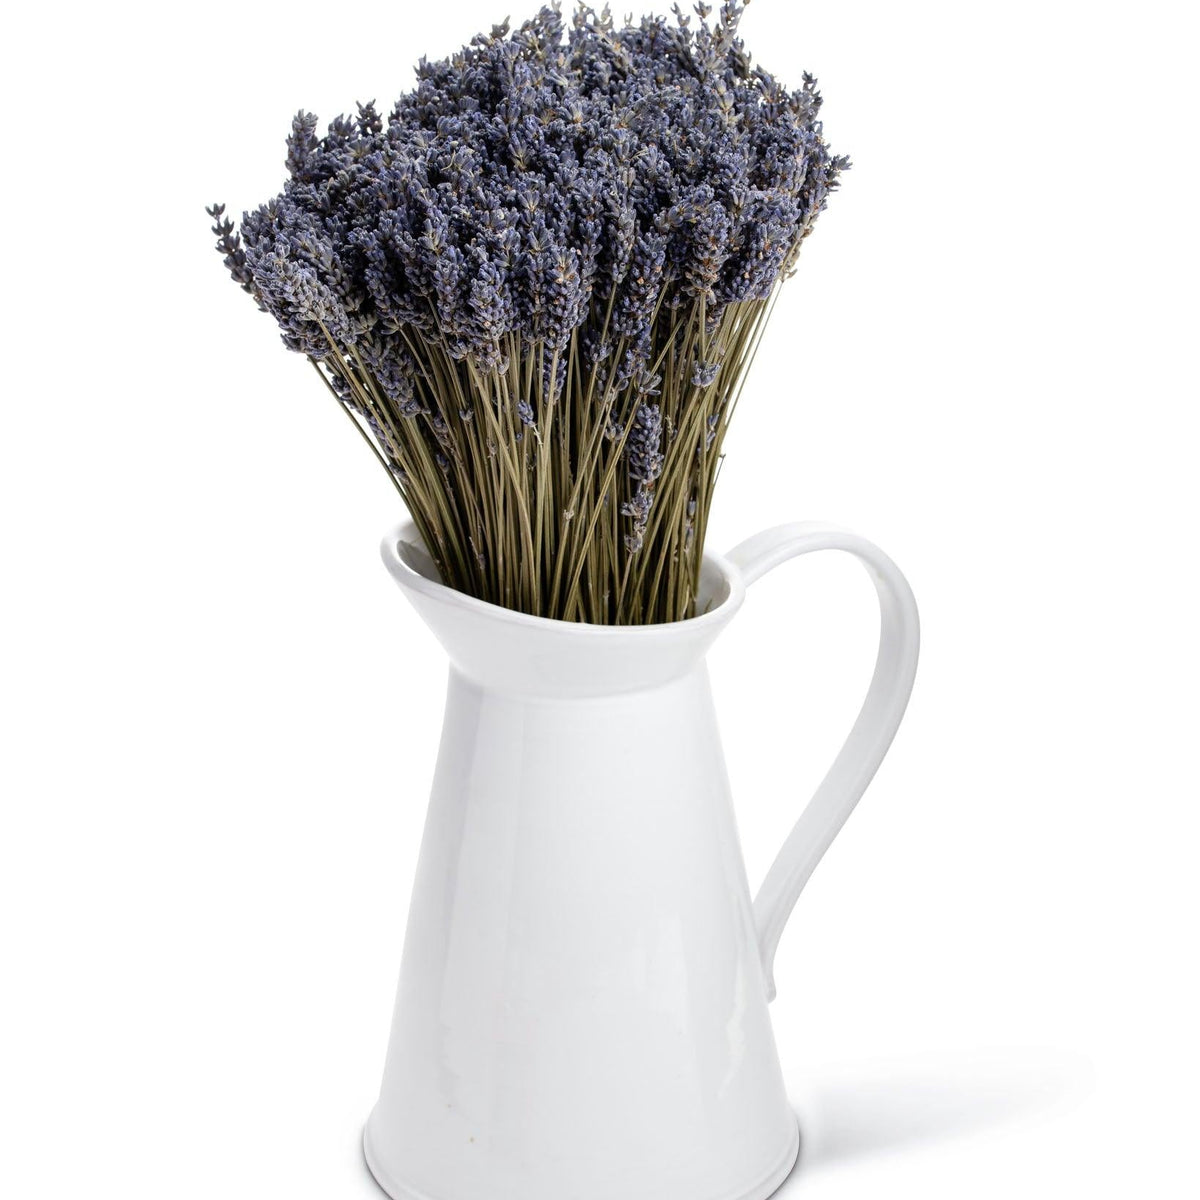 Dried French Lavender Bunches- Set of 2 - New York Lavender by the Bay